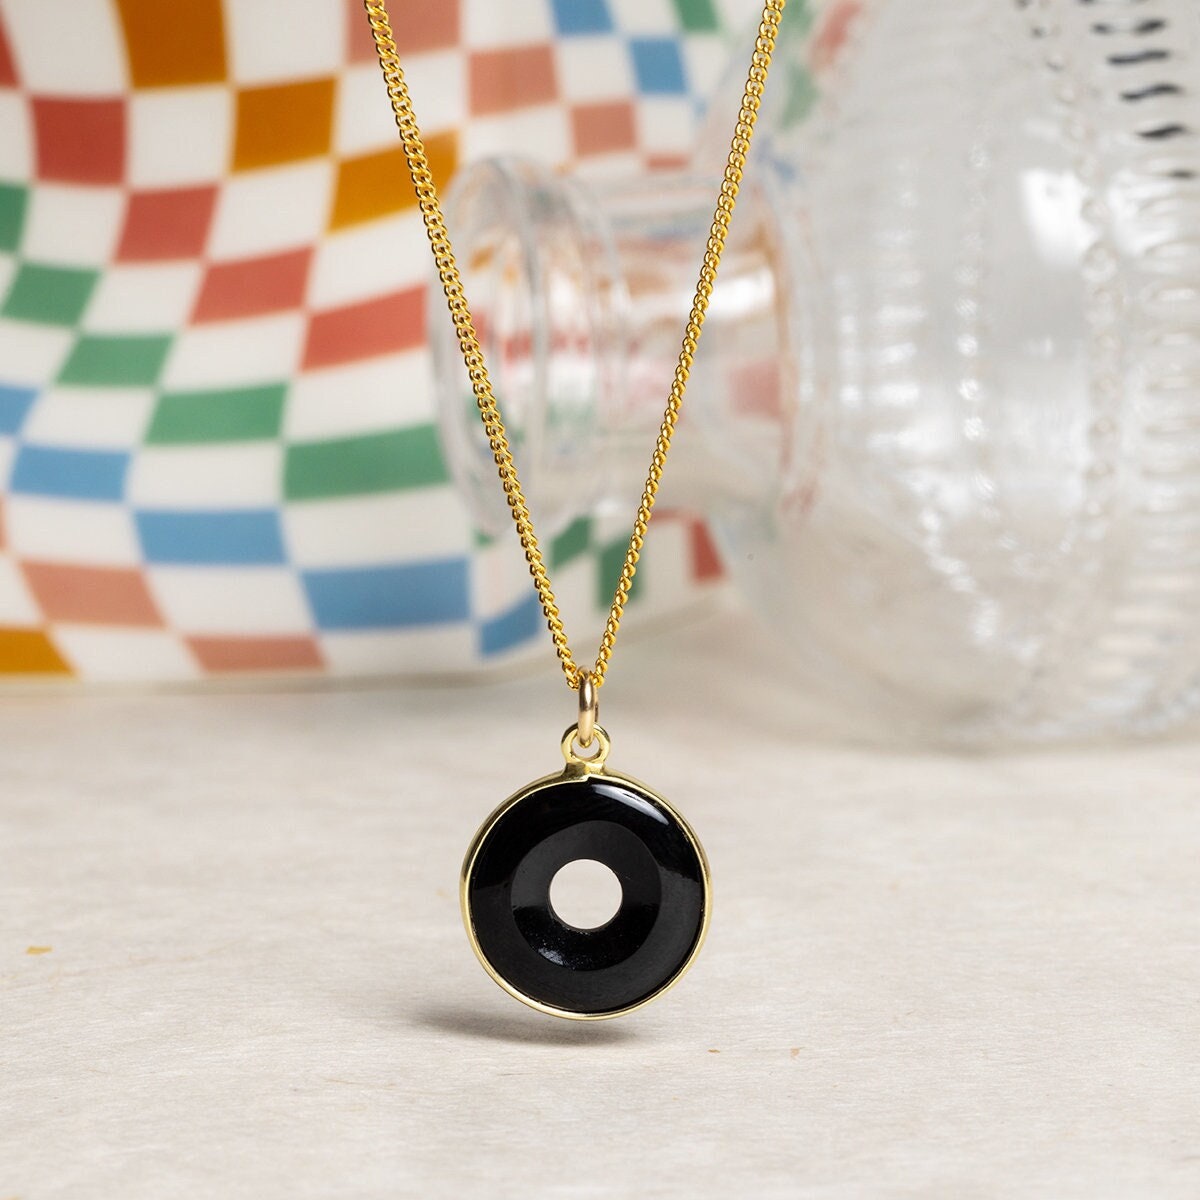 Black Onyx 14k Gold Filled Curb Chain Rounded Gemstone Necklace Necklaces Soul & Little Rose   